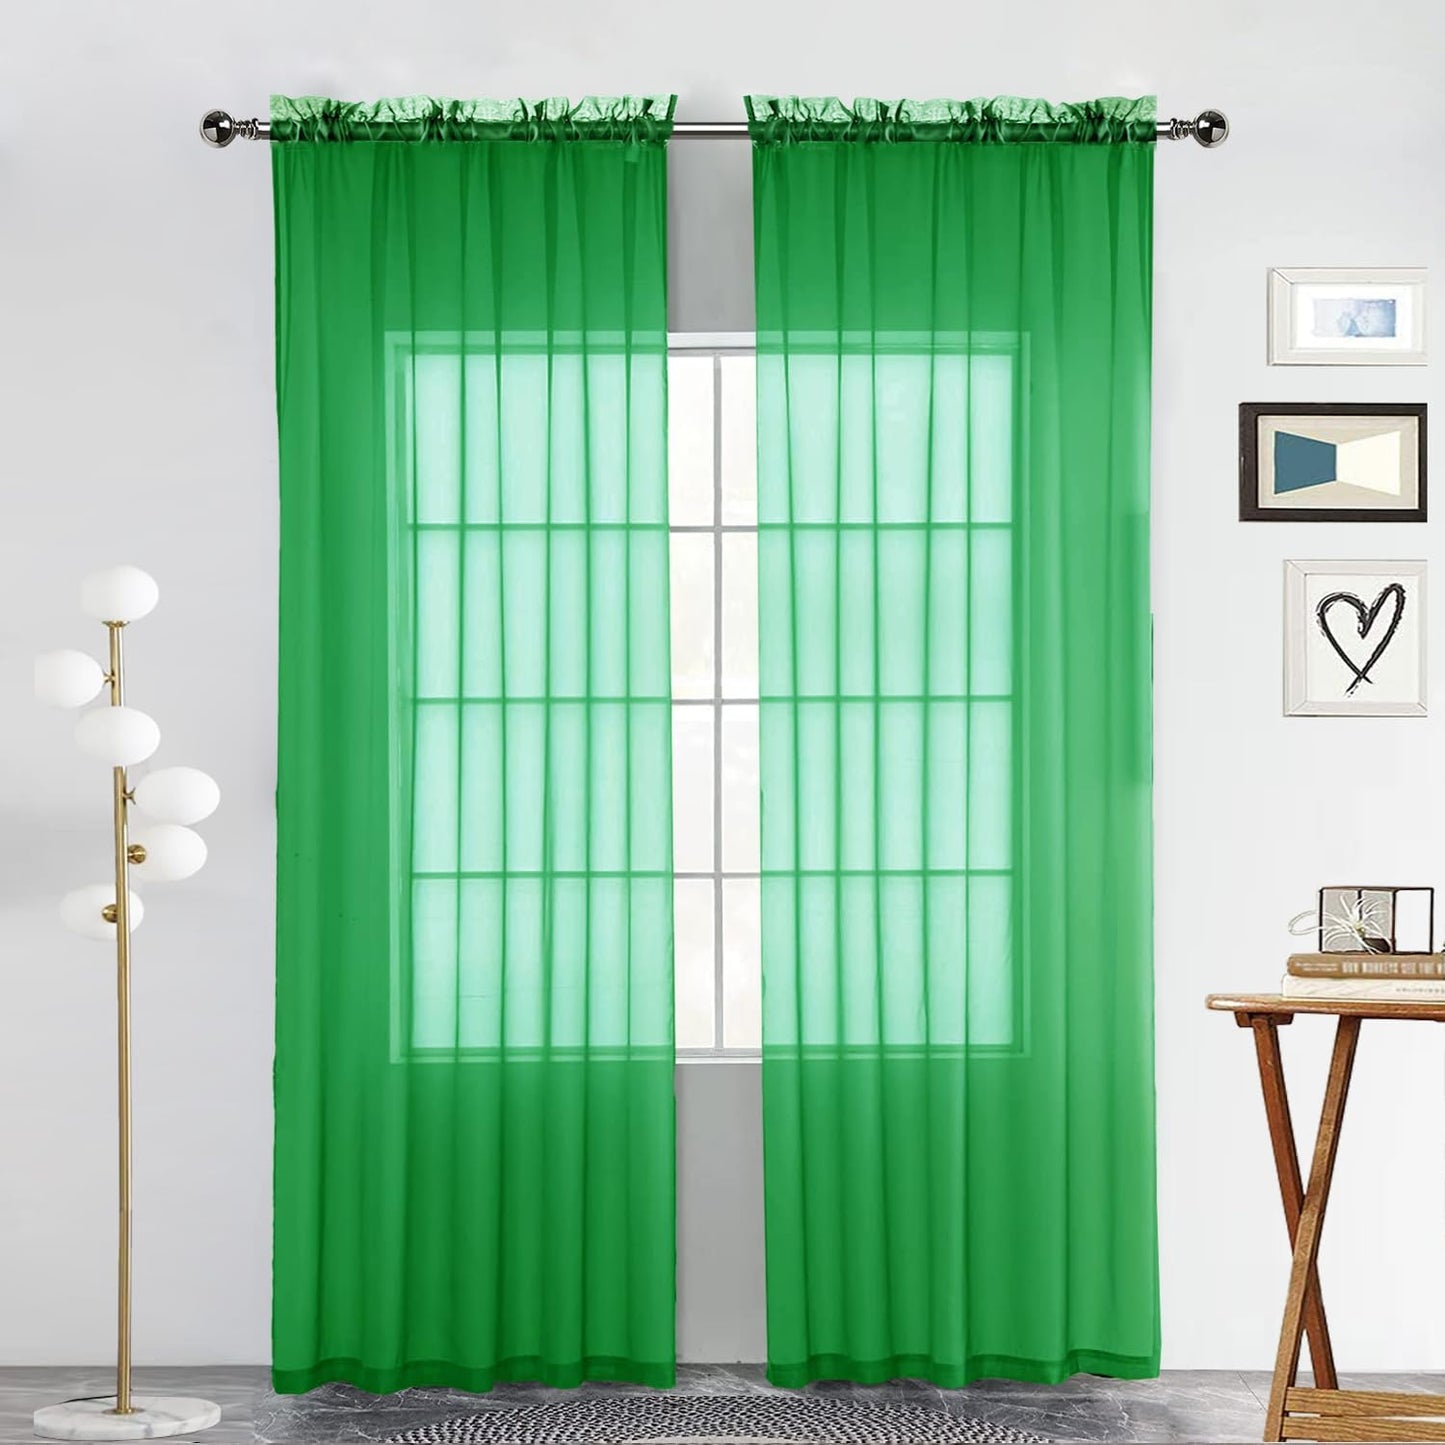 Spacedresser Basic Rod Pocket Sheer Voile Window Curtain Panels White 1 Pair 2 Panels 52 Width 84 Inch Long for Kitchen Bedroom Children Living Room Yard(White,52 W X 84 L)  Lucky Home Green 52 W X 63 L 